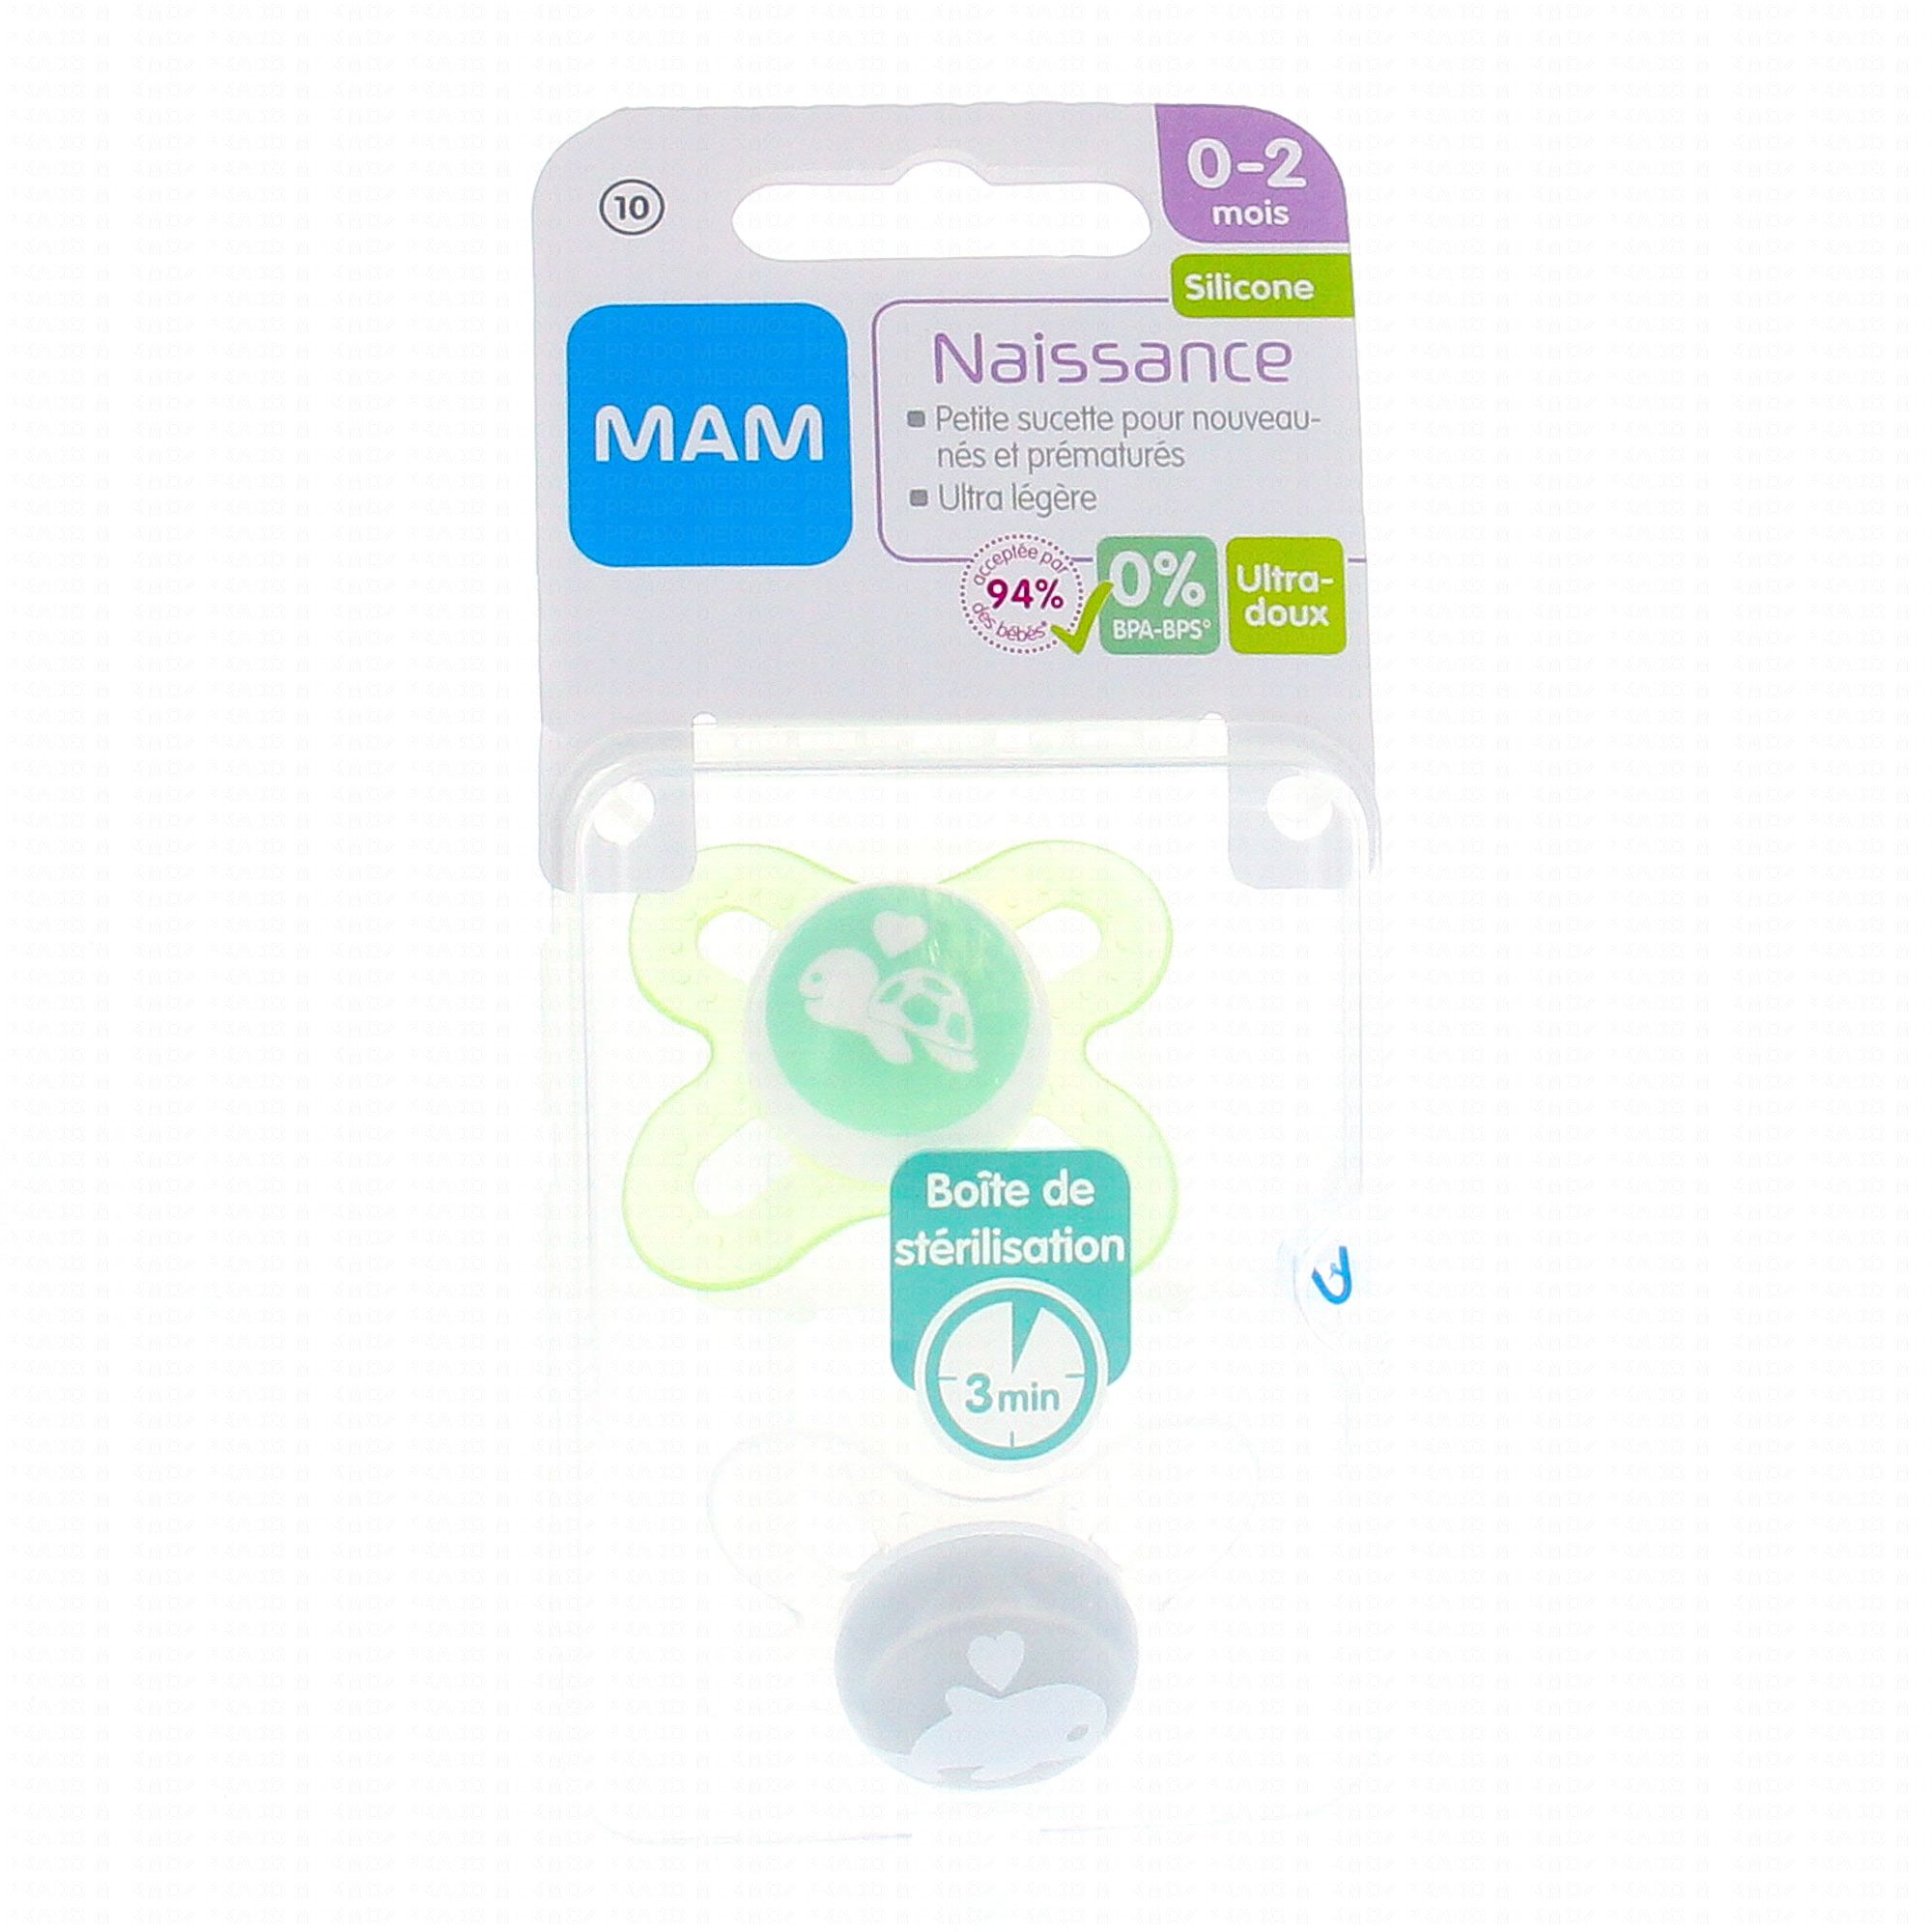 Mam Perfect Start 0-2 mois Silicone Mam, 1 sucette 